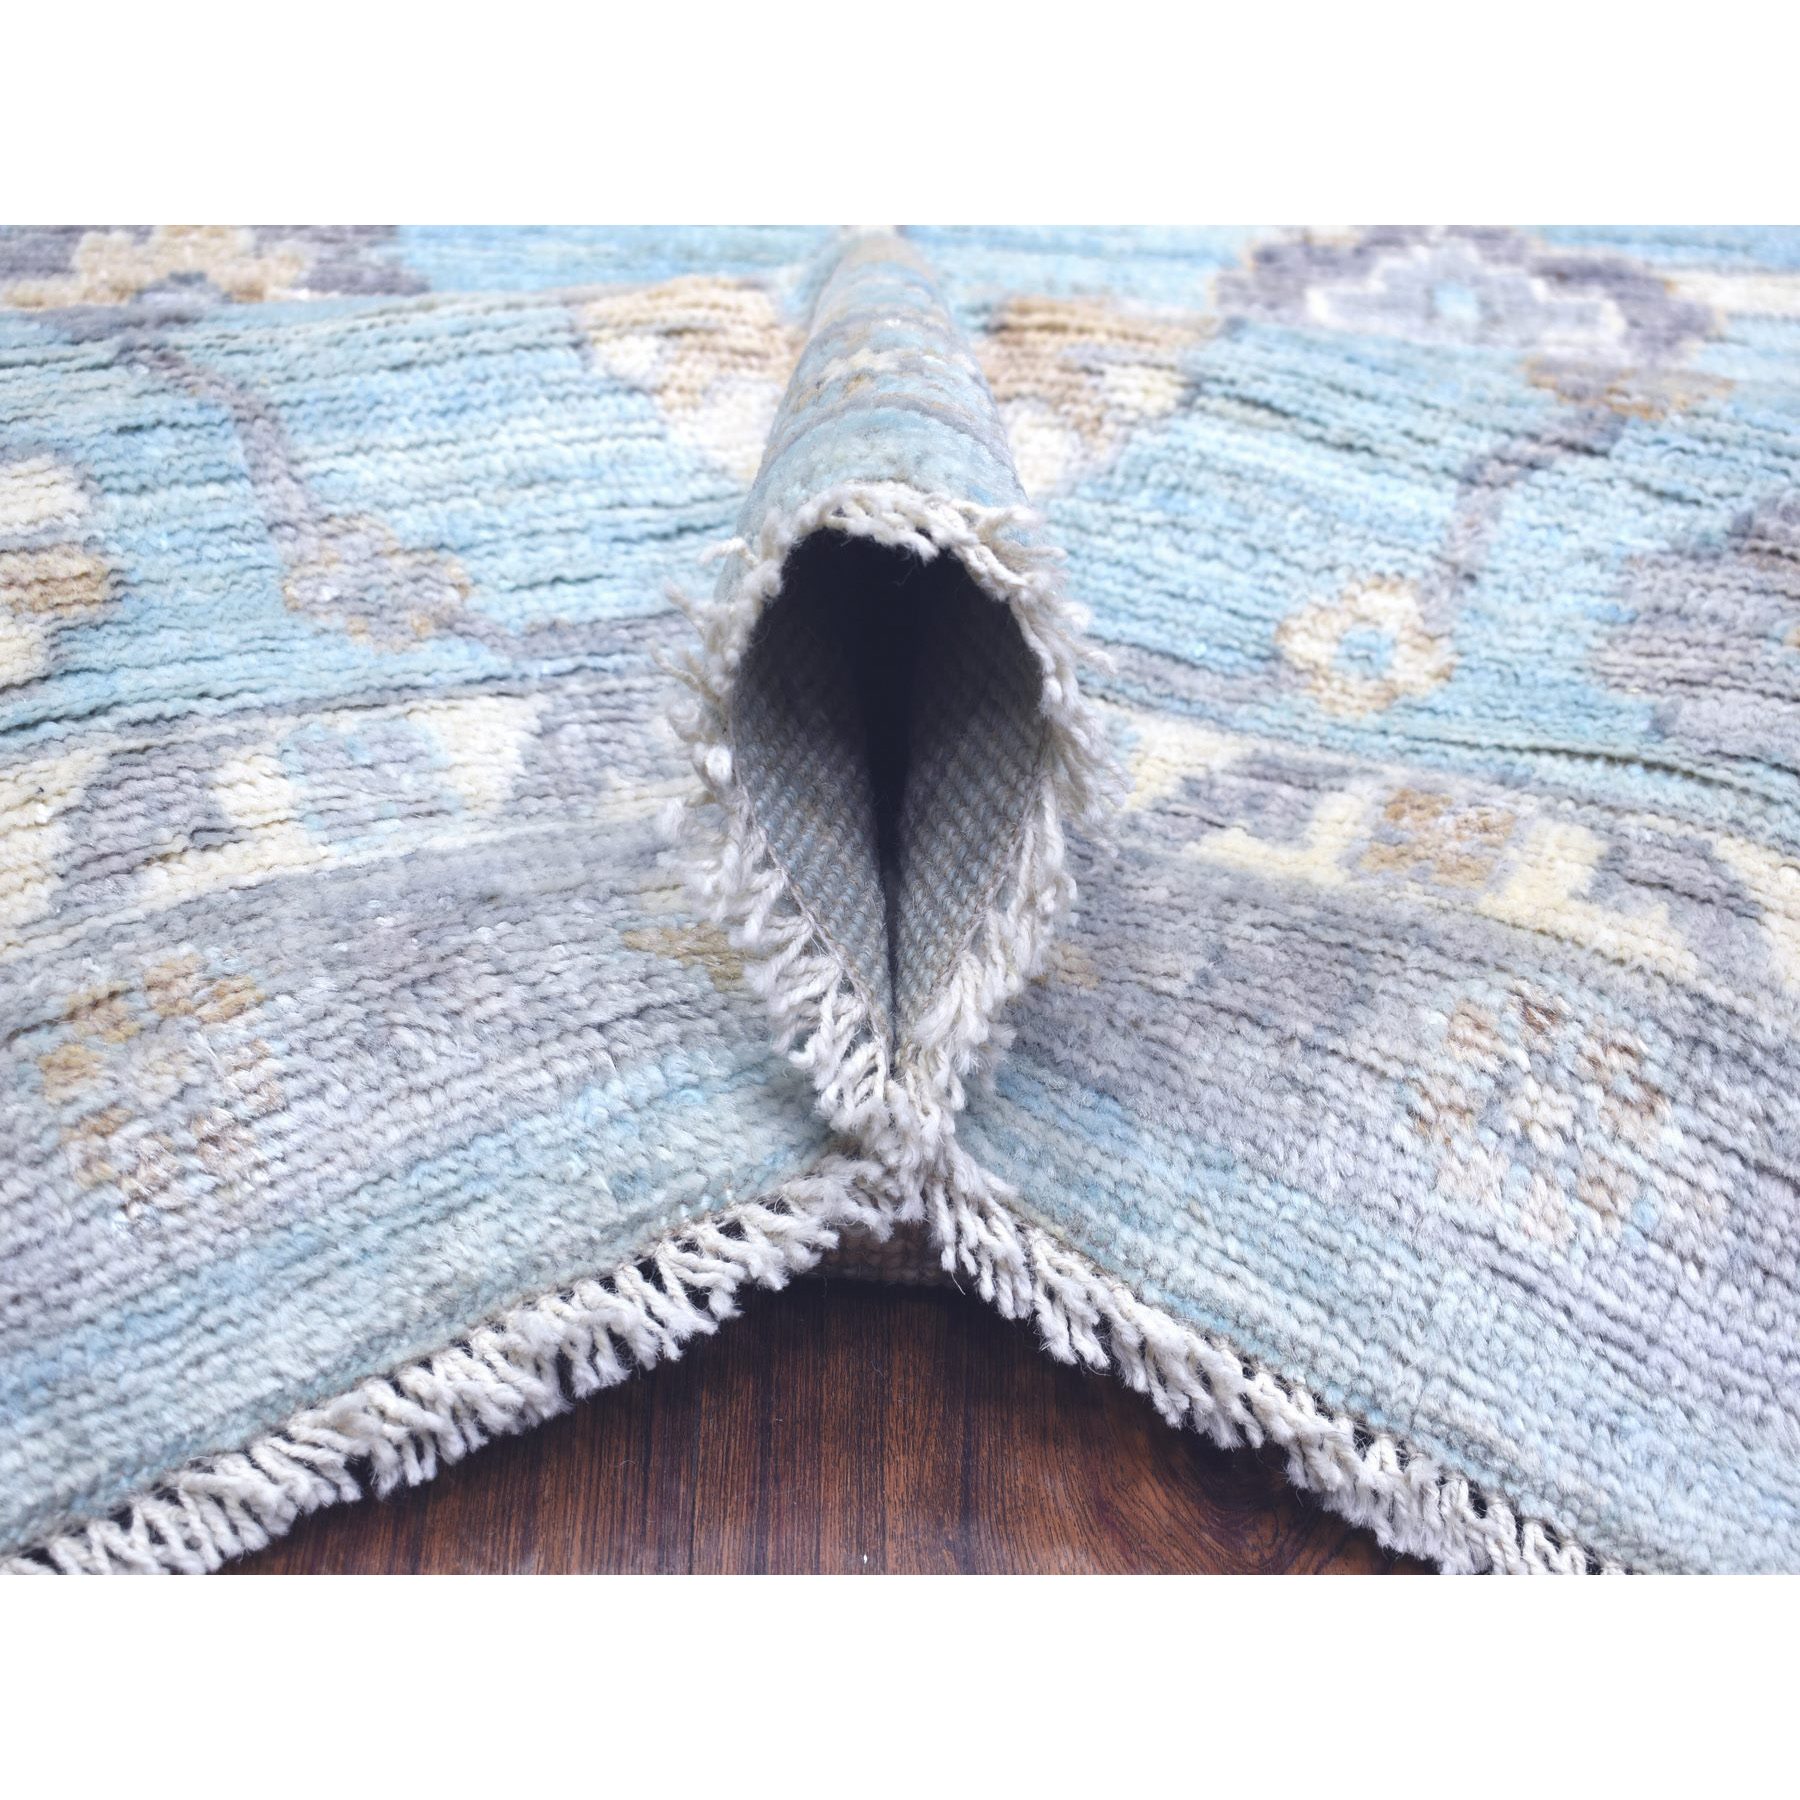 9'3"x12' Blue Angora Oushak All Over Motifs Natural Dyes, Afghan Wool Hand Woven Oriental Rug 